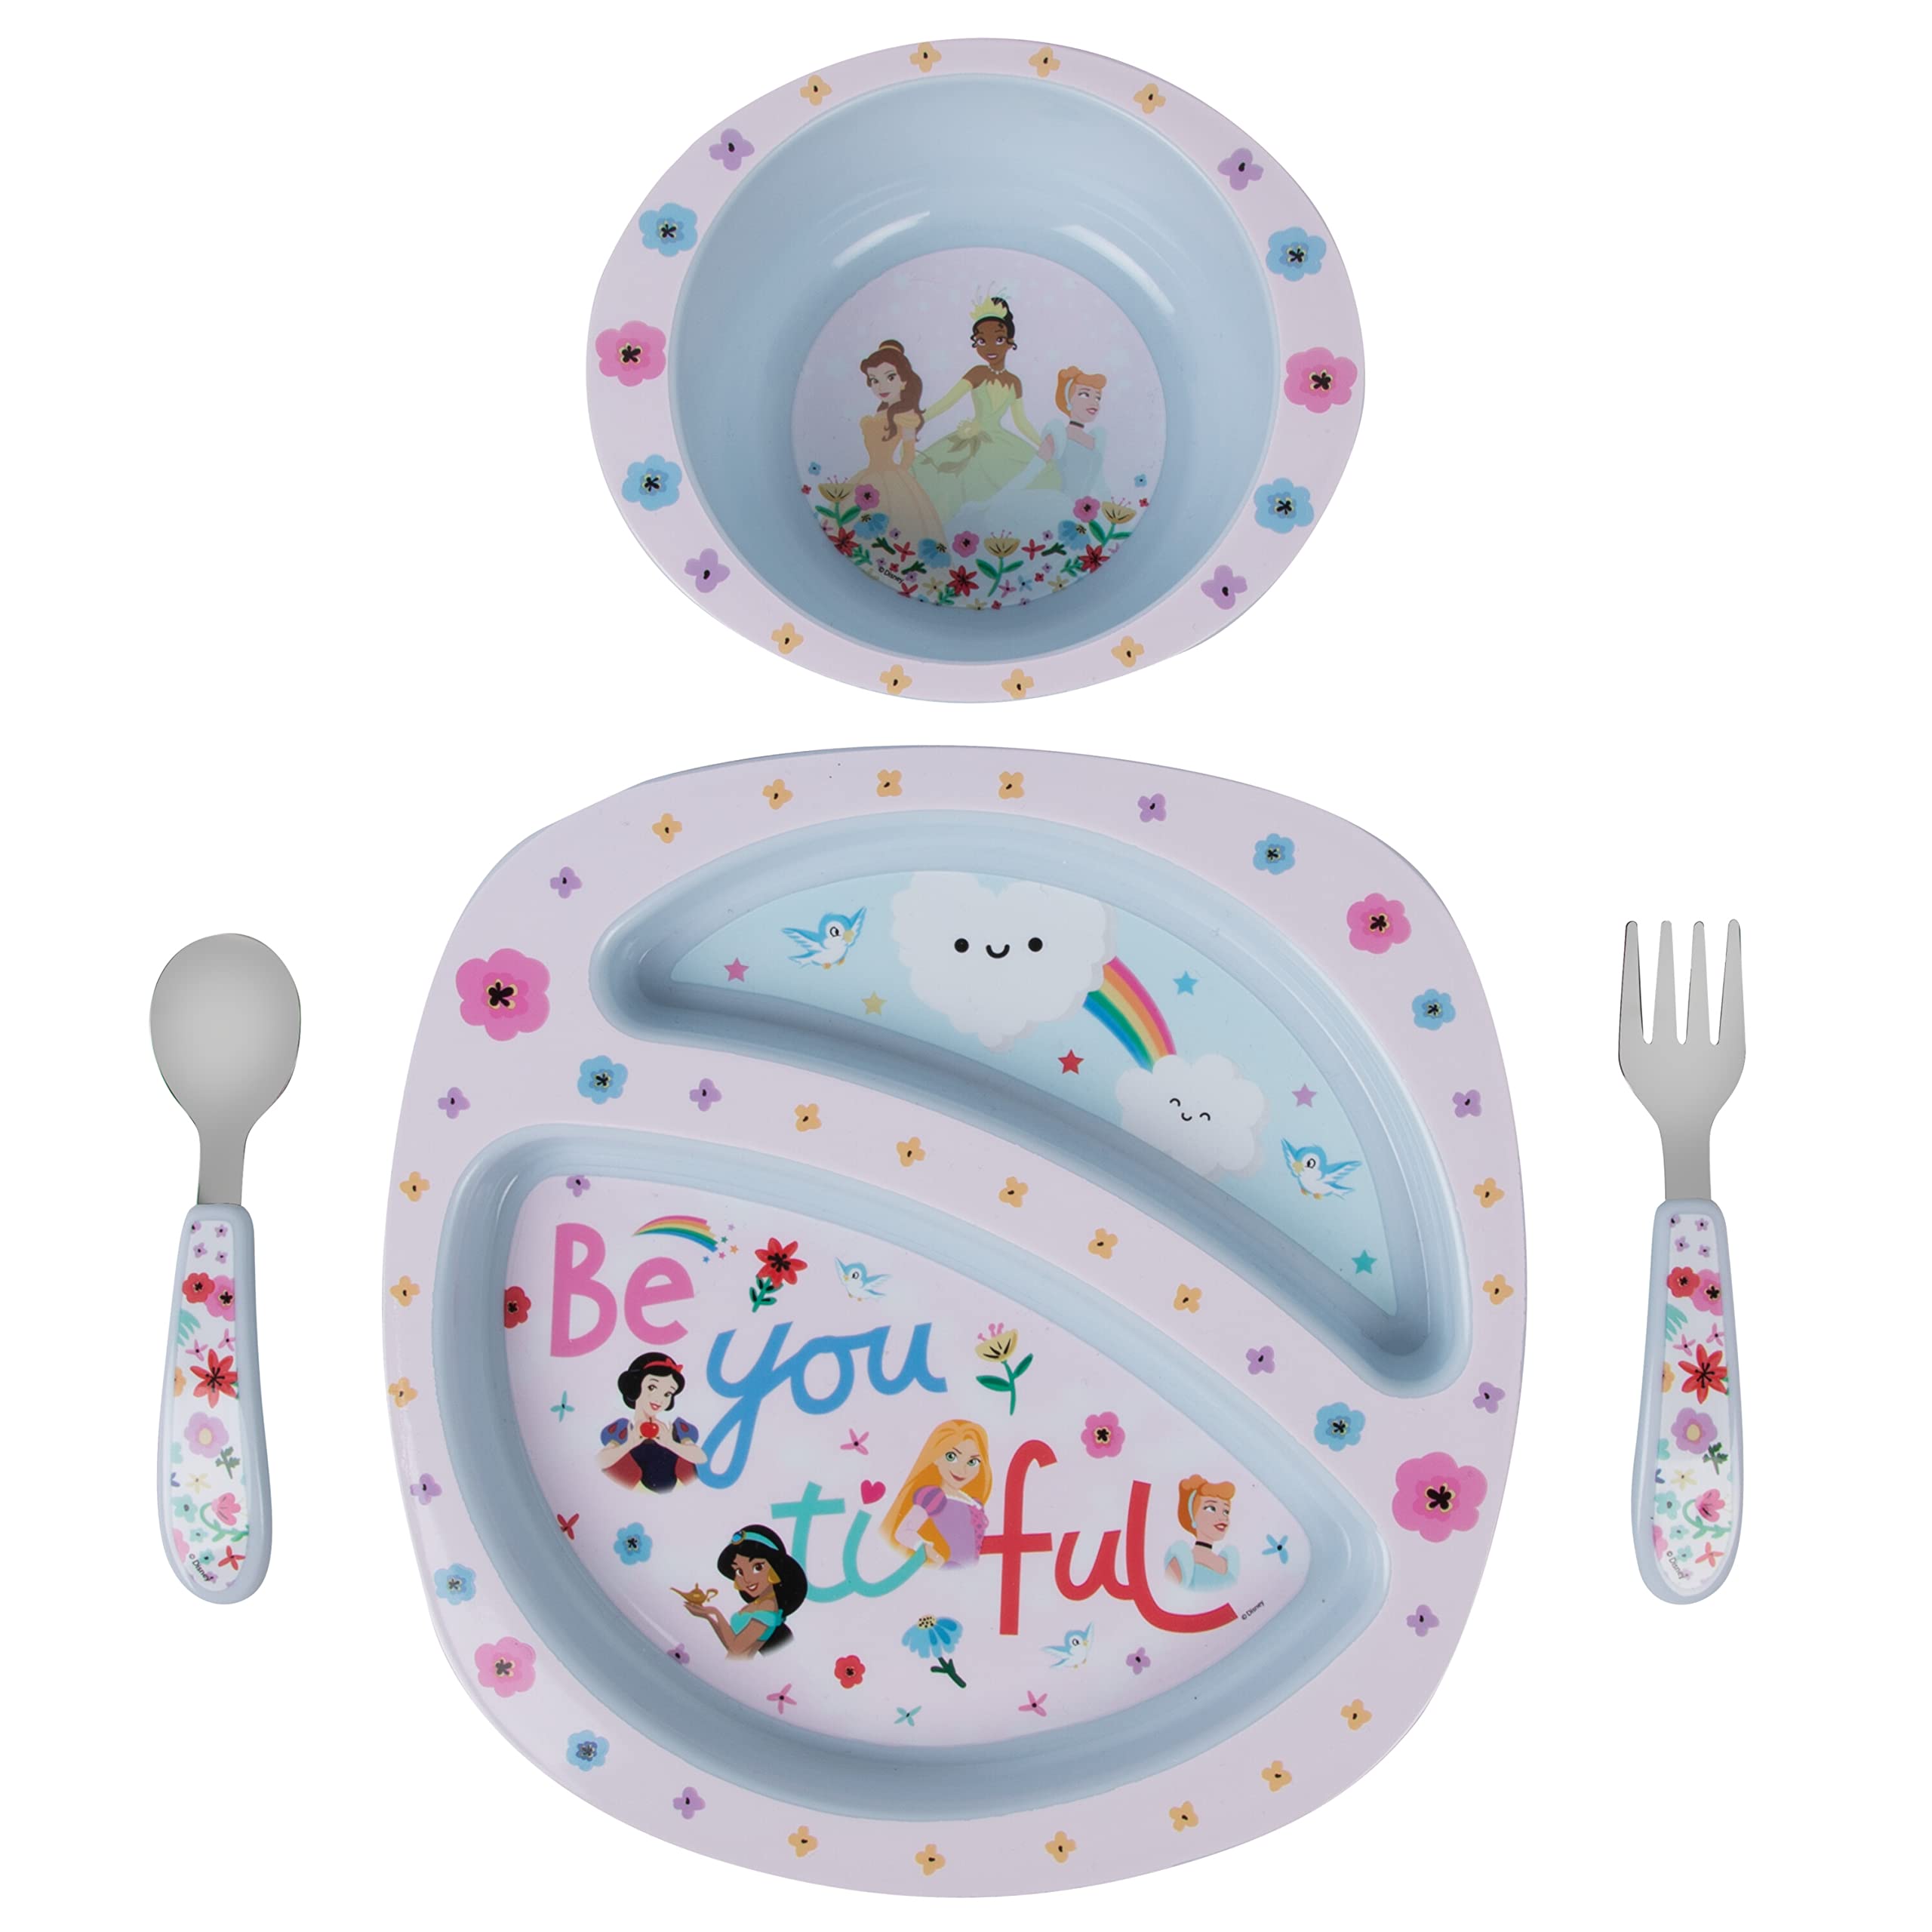 The First Years Disney Princess 4-Piece Toddler Dinnerware Set - Dishwasher Safe Bowl, Plate, Fork & Spoon - 4 Count